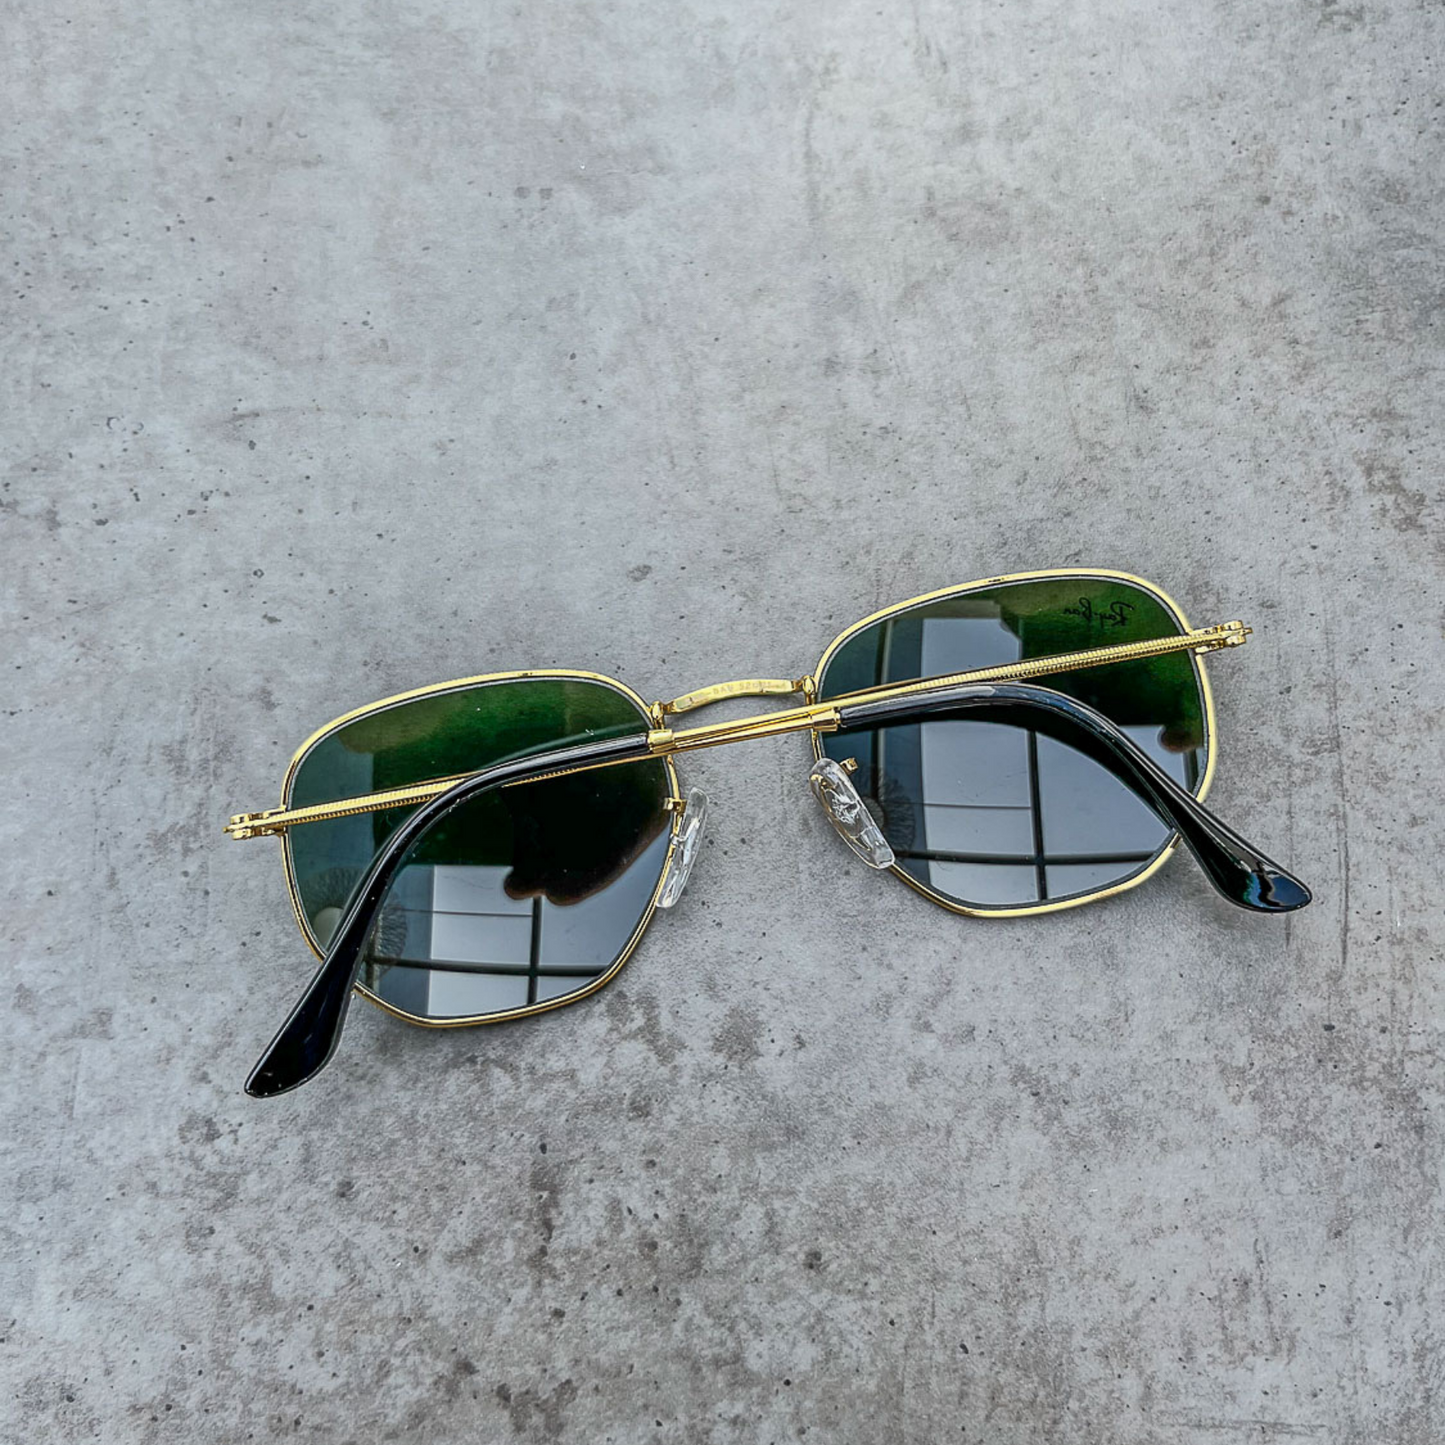 New Stylish Attractive Green & Gold 3447 Round Sunglass For Unisex